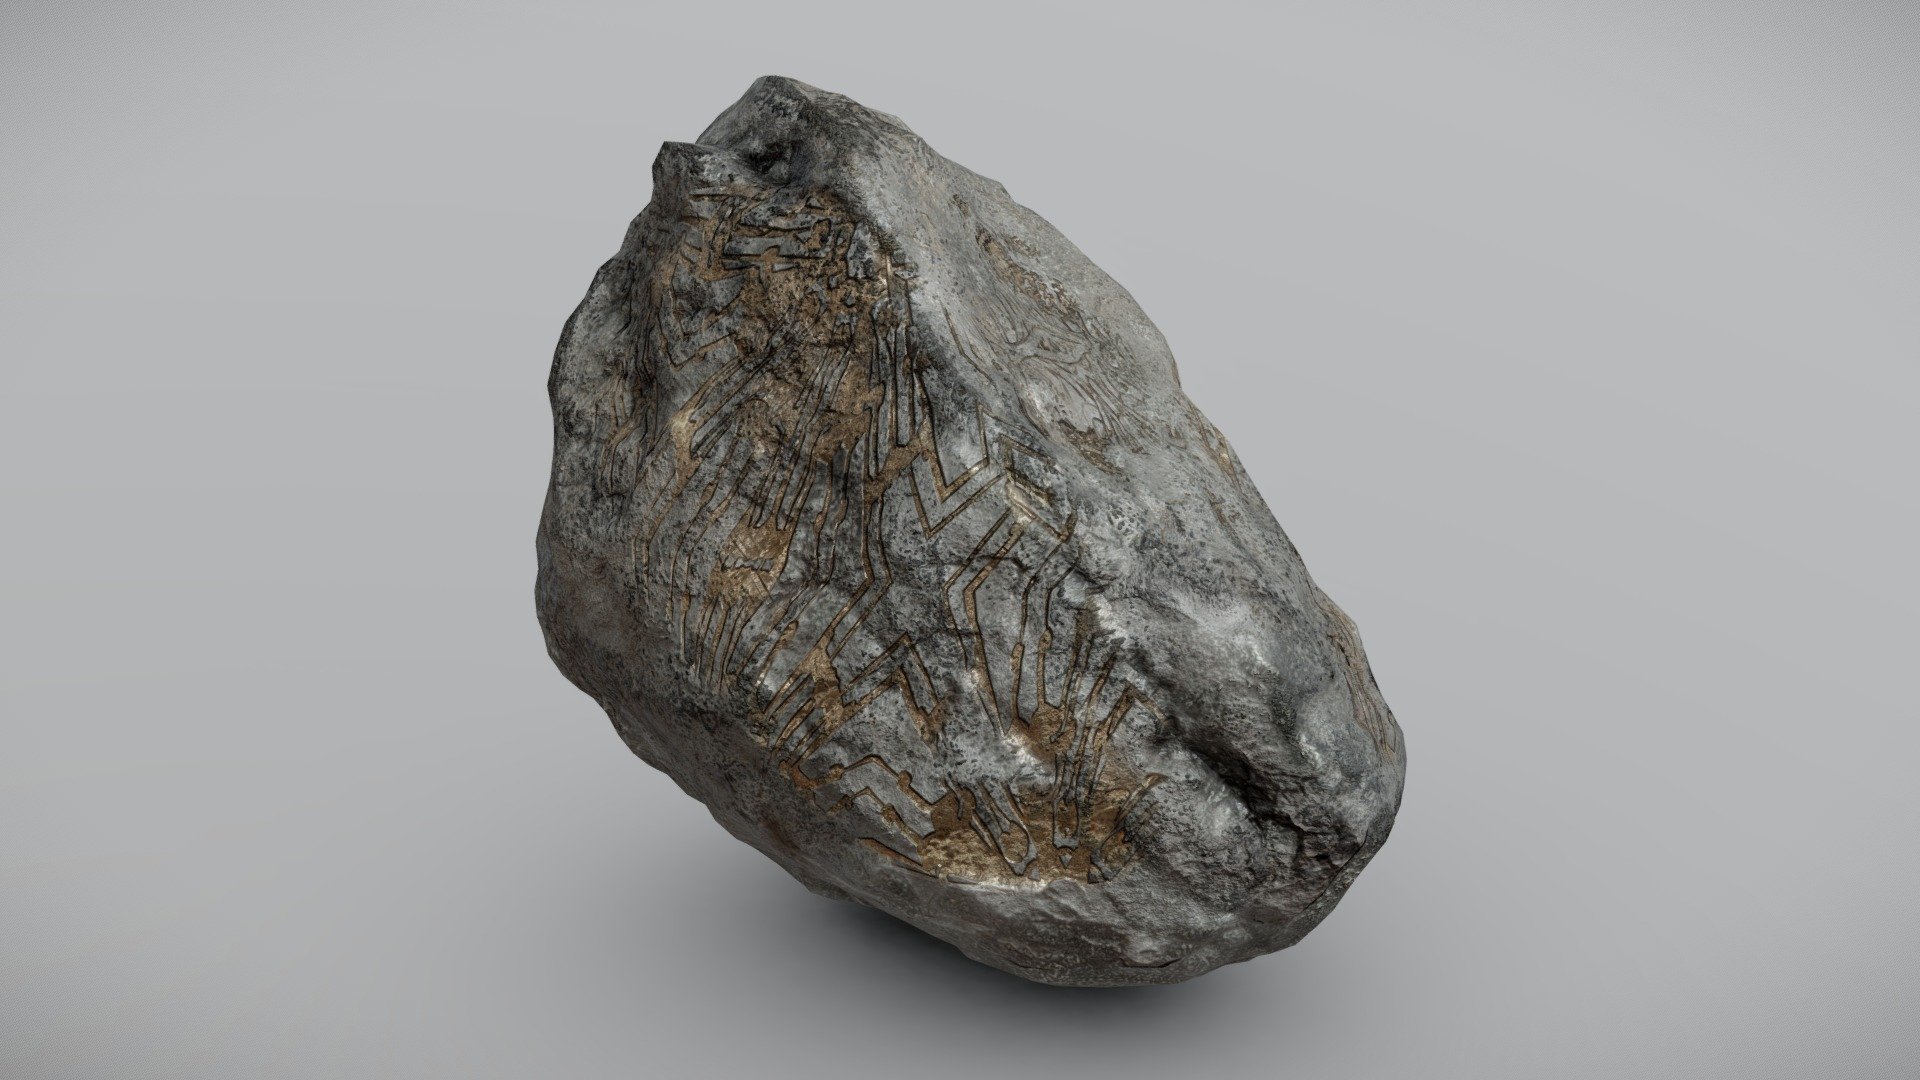 A rock with some ancient technology fossils embeded in it. Hand sculpted and painted 3d model